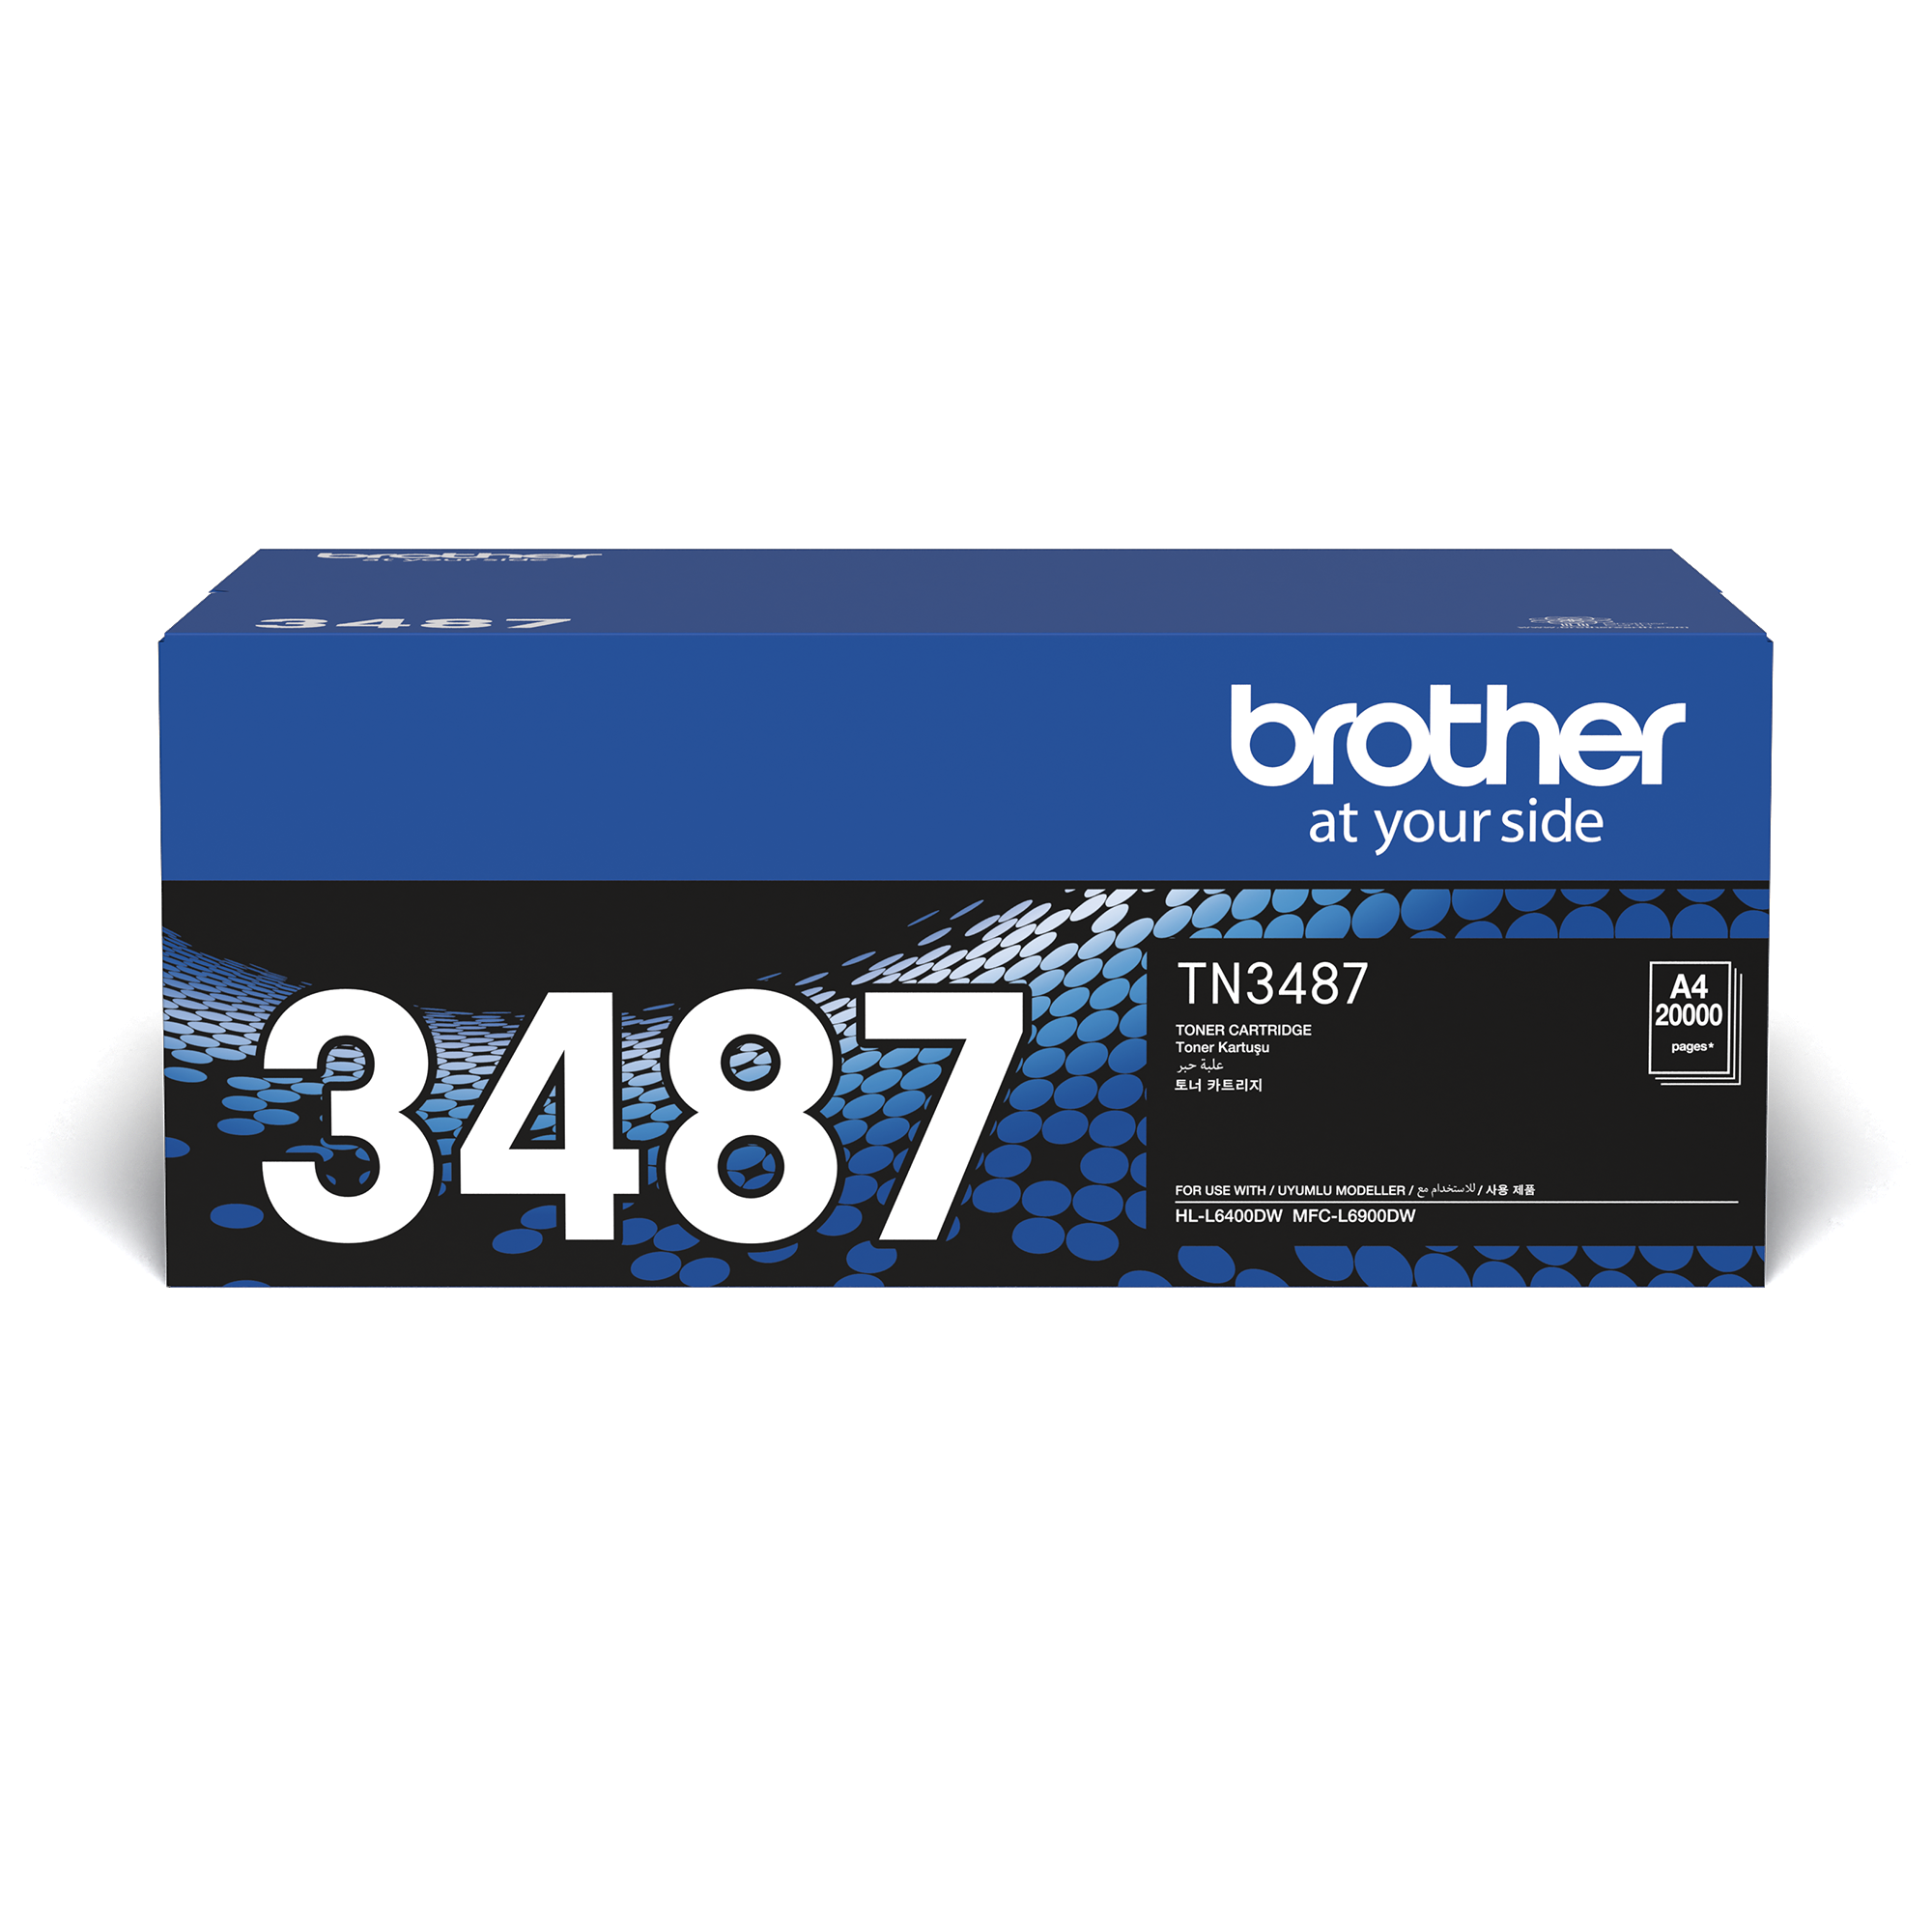 Brother TN-3487 TN-3487 Black Toner Cartridge (20,000 Pages)